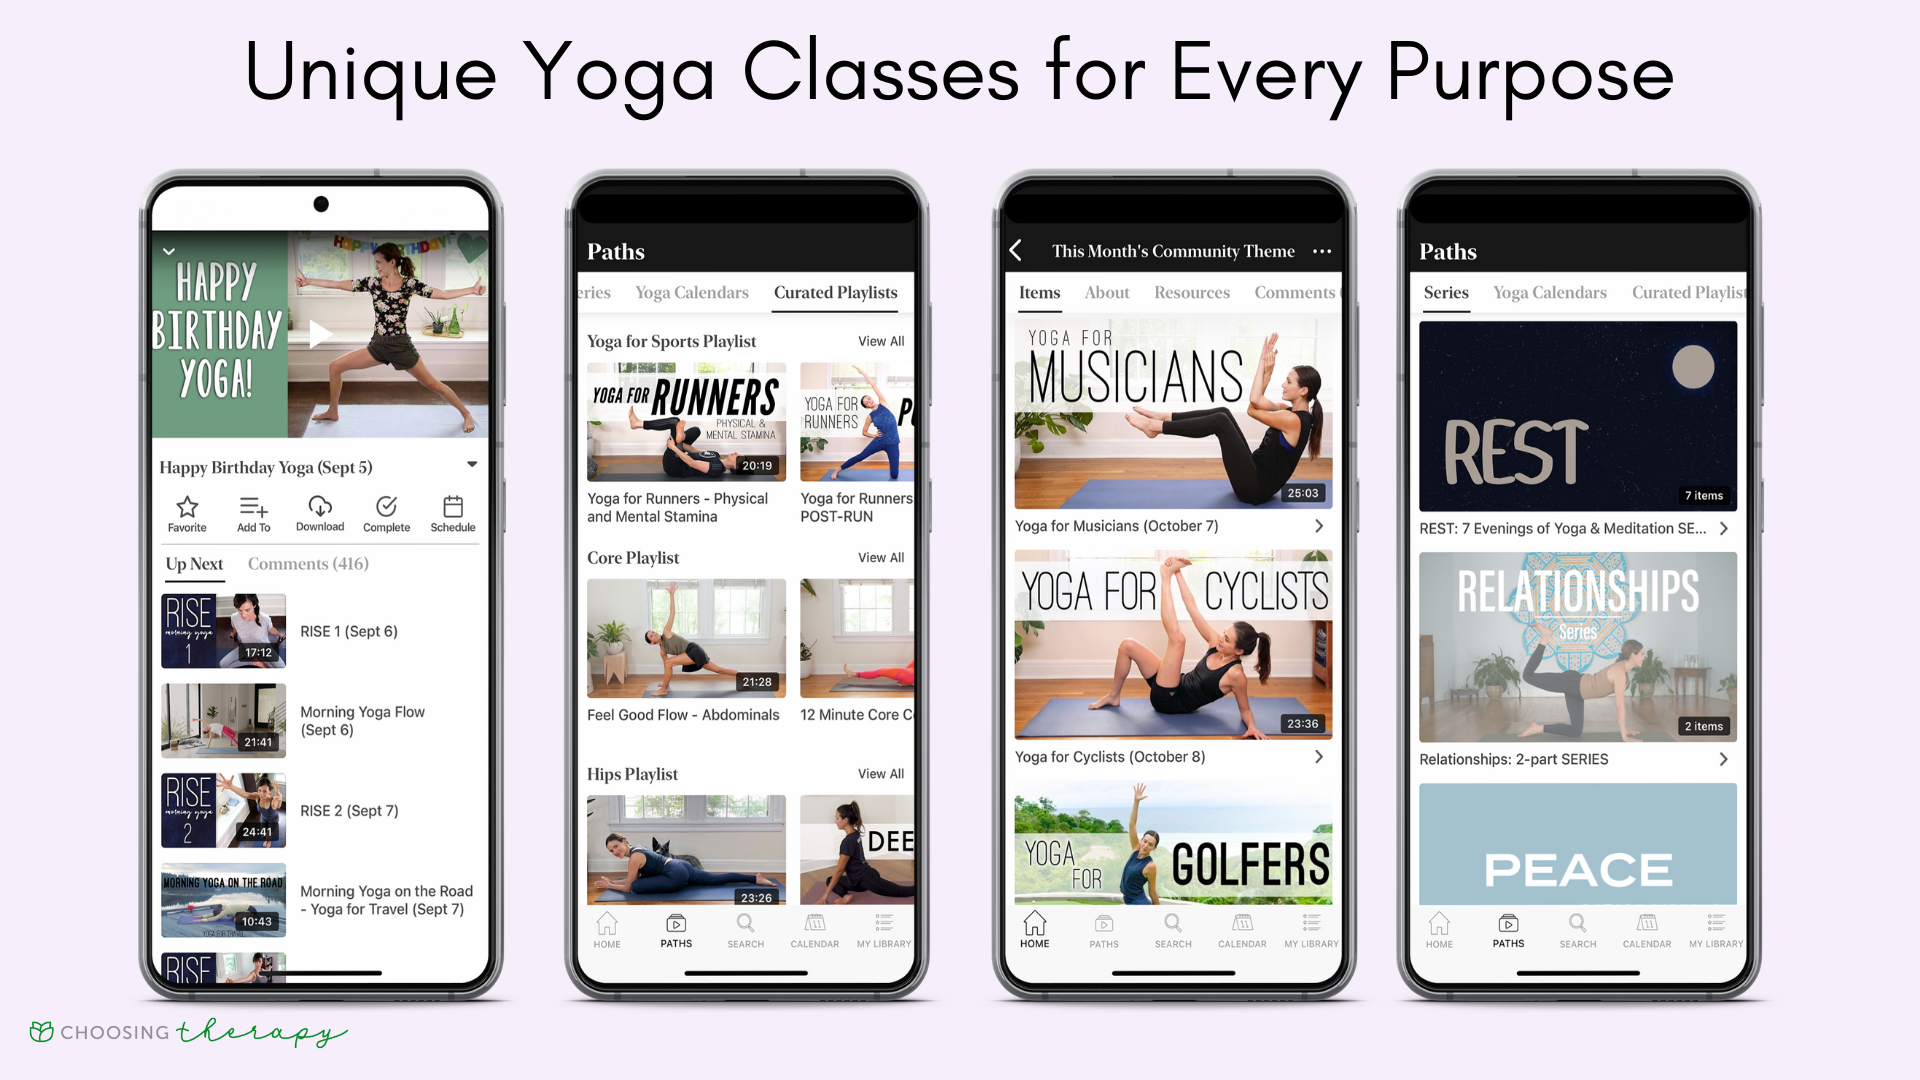 FWFG yoga app review 2022 - four images of the unique yoga clases offered in the app